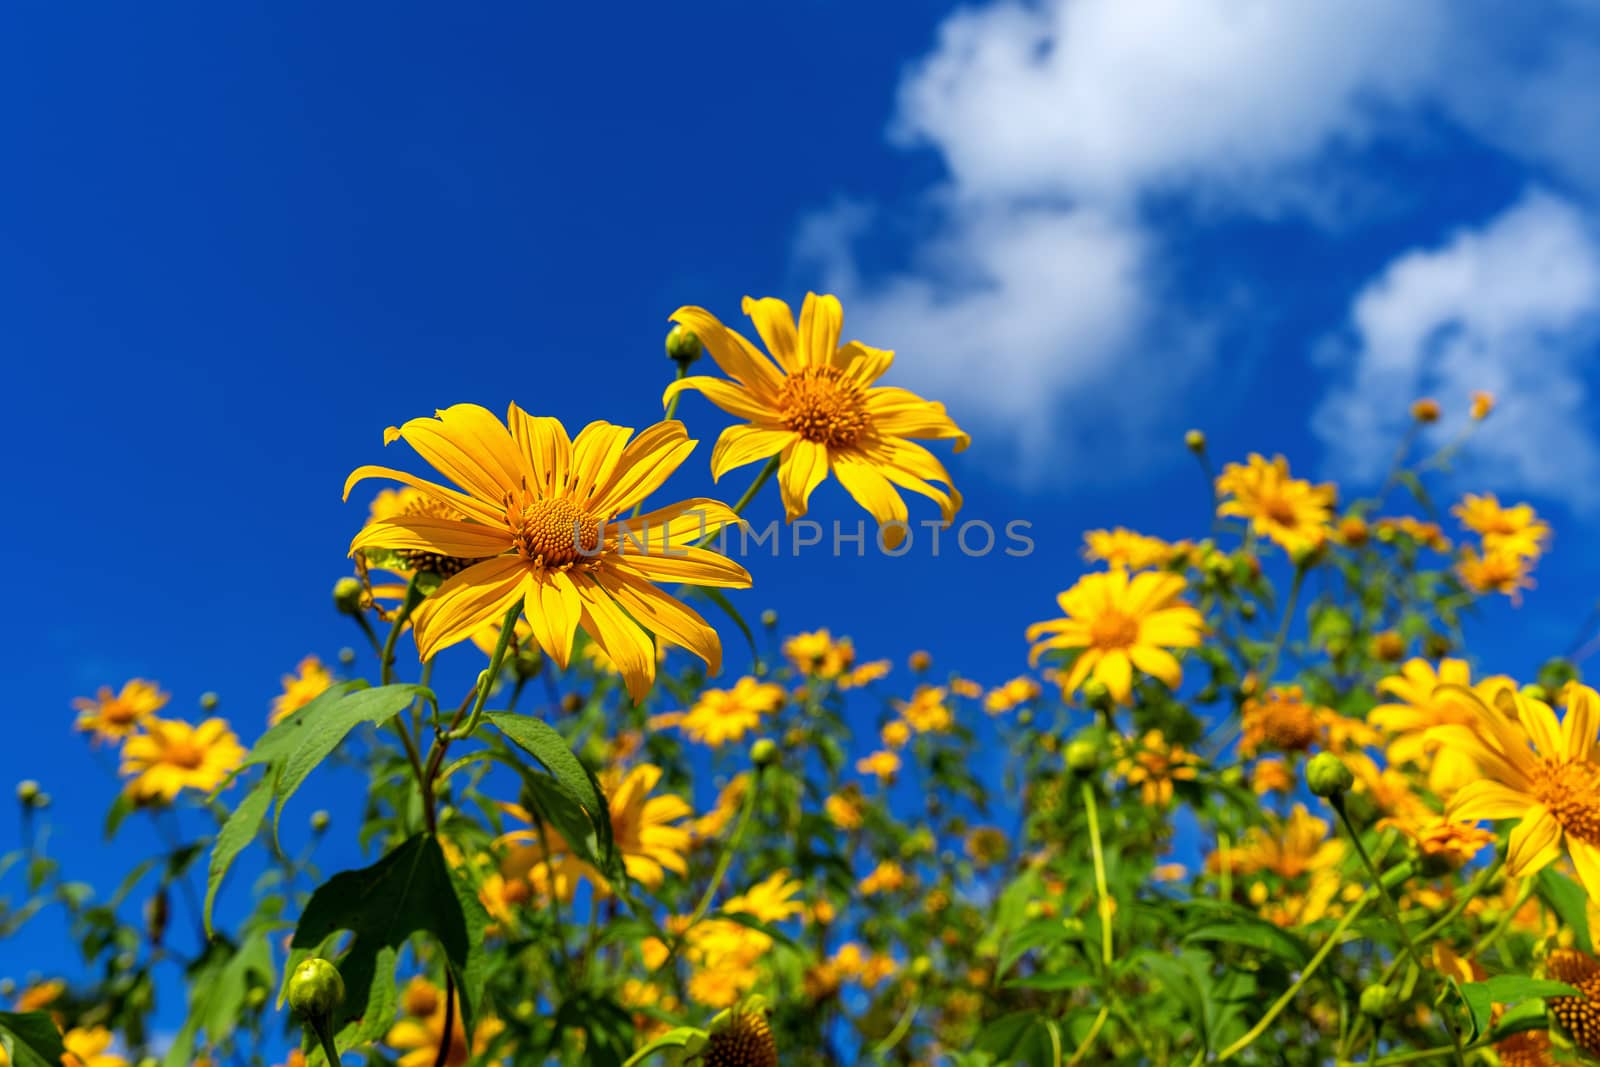 Tree marigold or Mexican flower blooming and blue sky. by gutarphotoghaphy